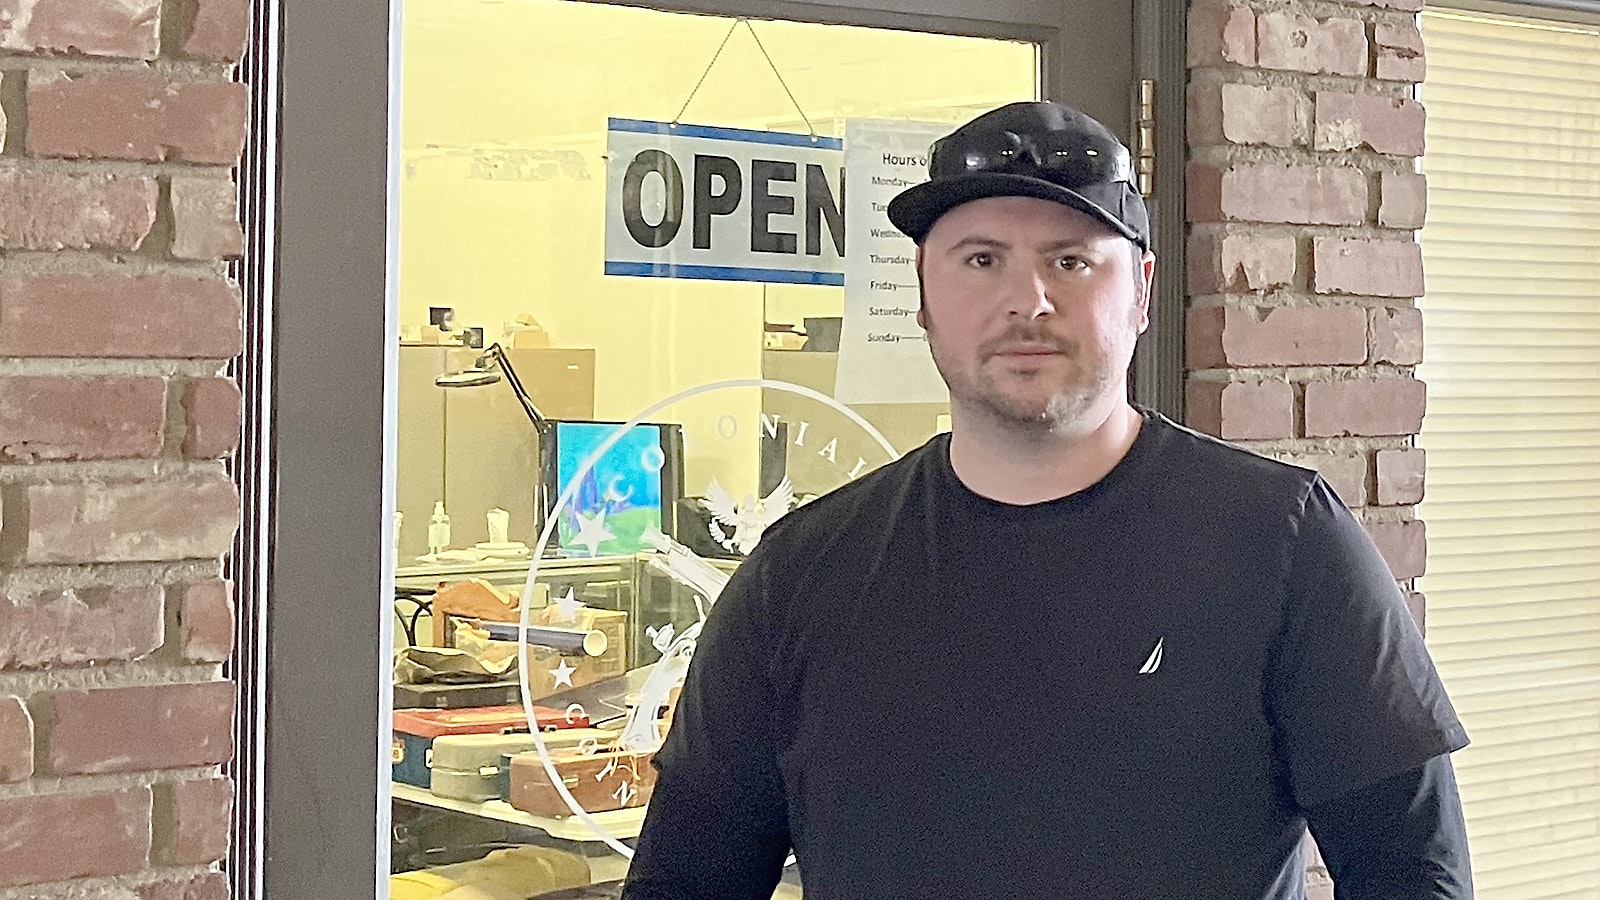 Justin Wayne Foster, owner of Colonial Coins and Currency, is accused of faking a robbery to steal a coin collection worth between $80,000 and $100,000.